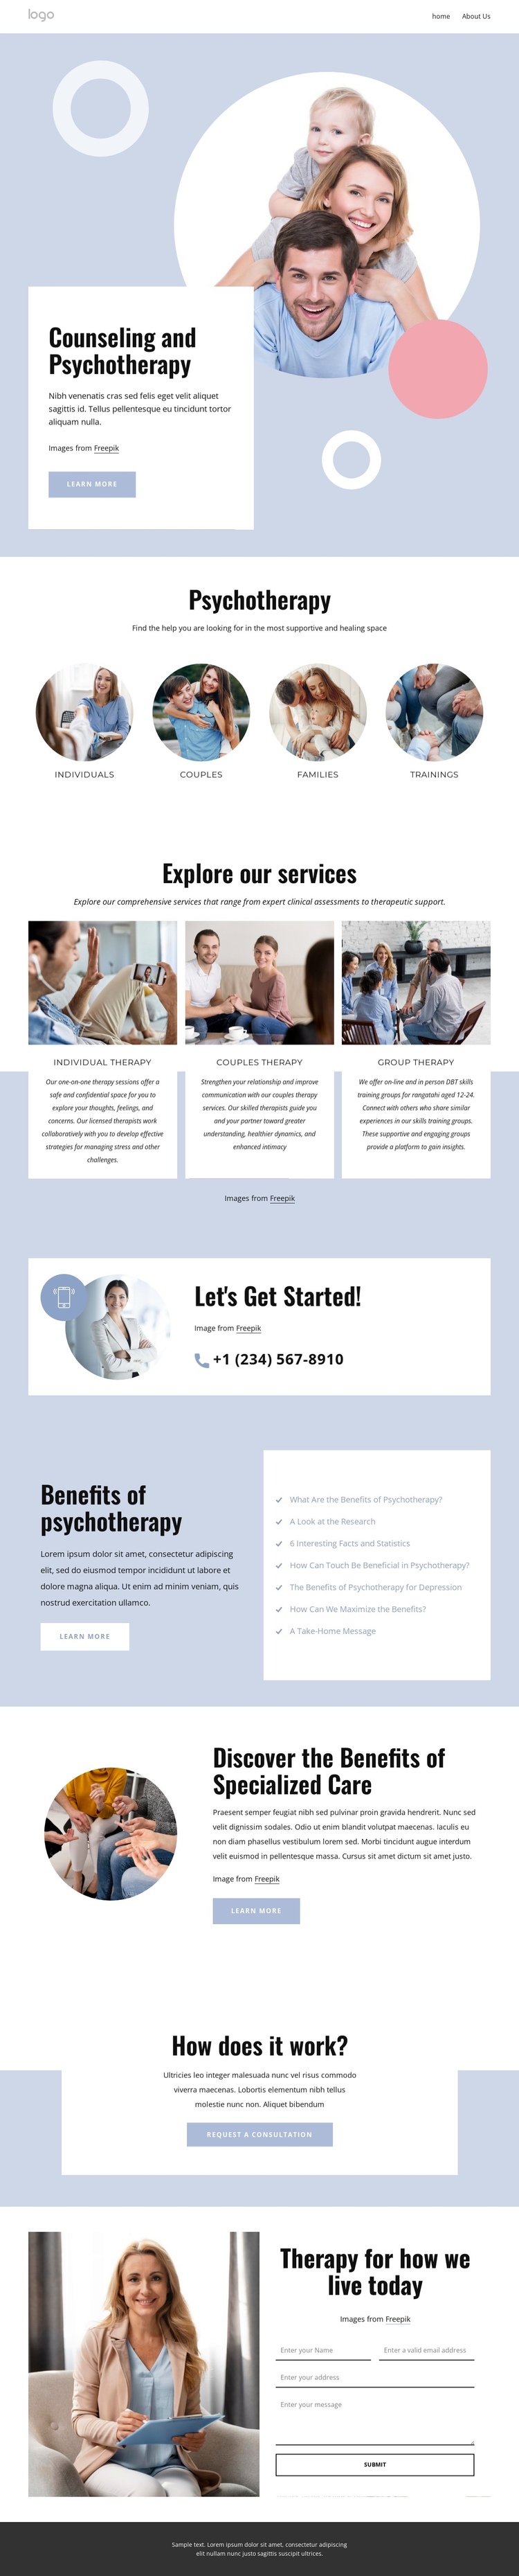 Counseling and psychotherapy Website Builder Software